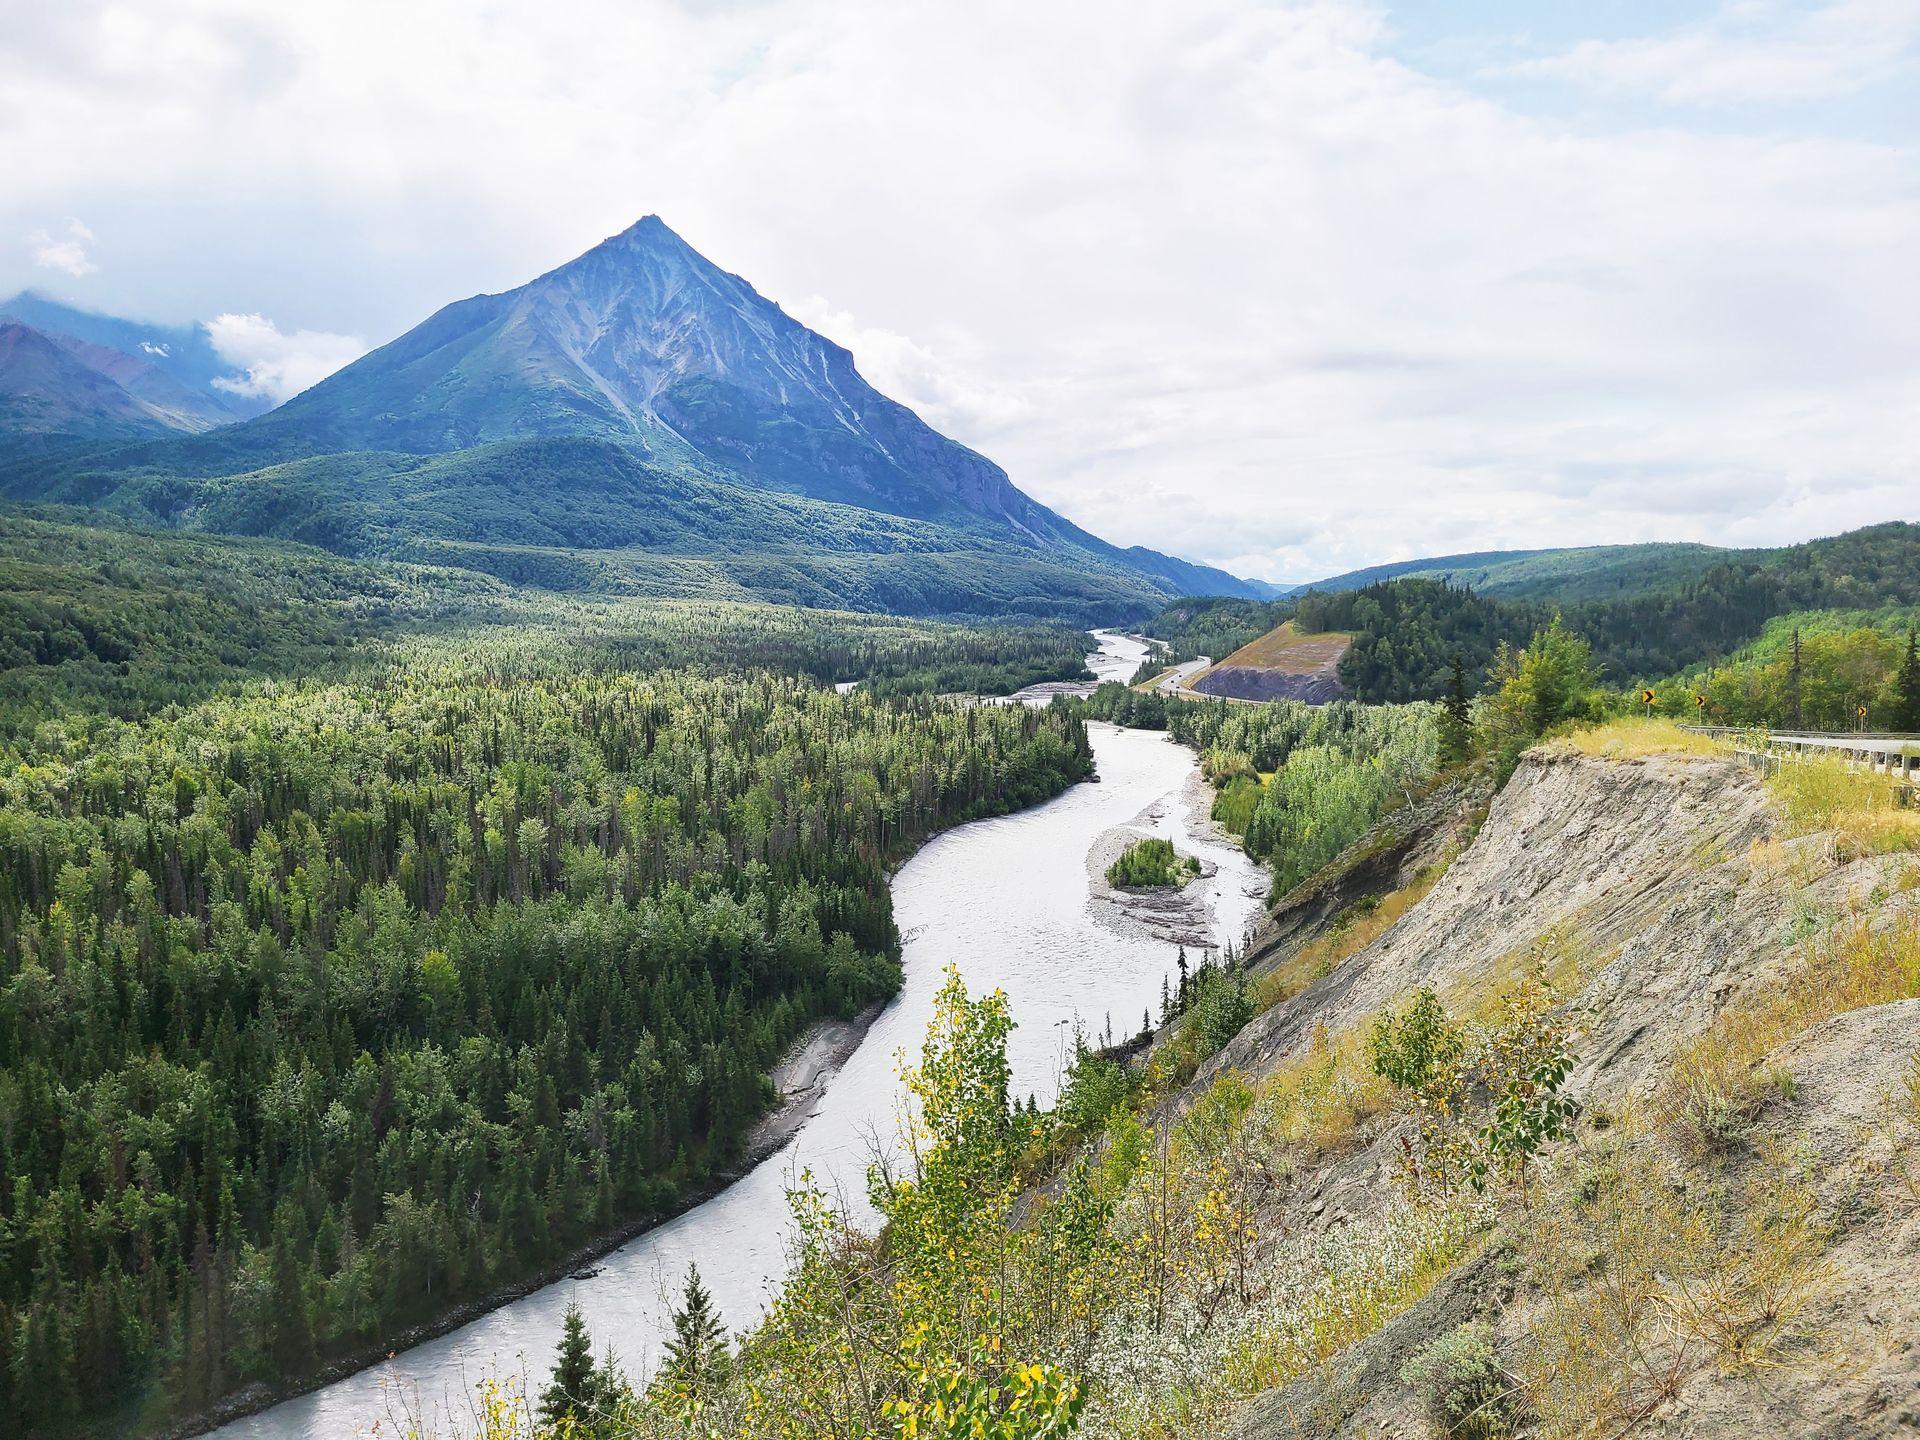 A view of the Matanuska River with a mountain in the background and beautiful greenery on the shores.